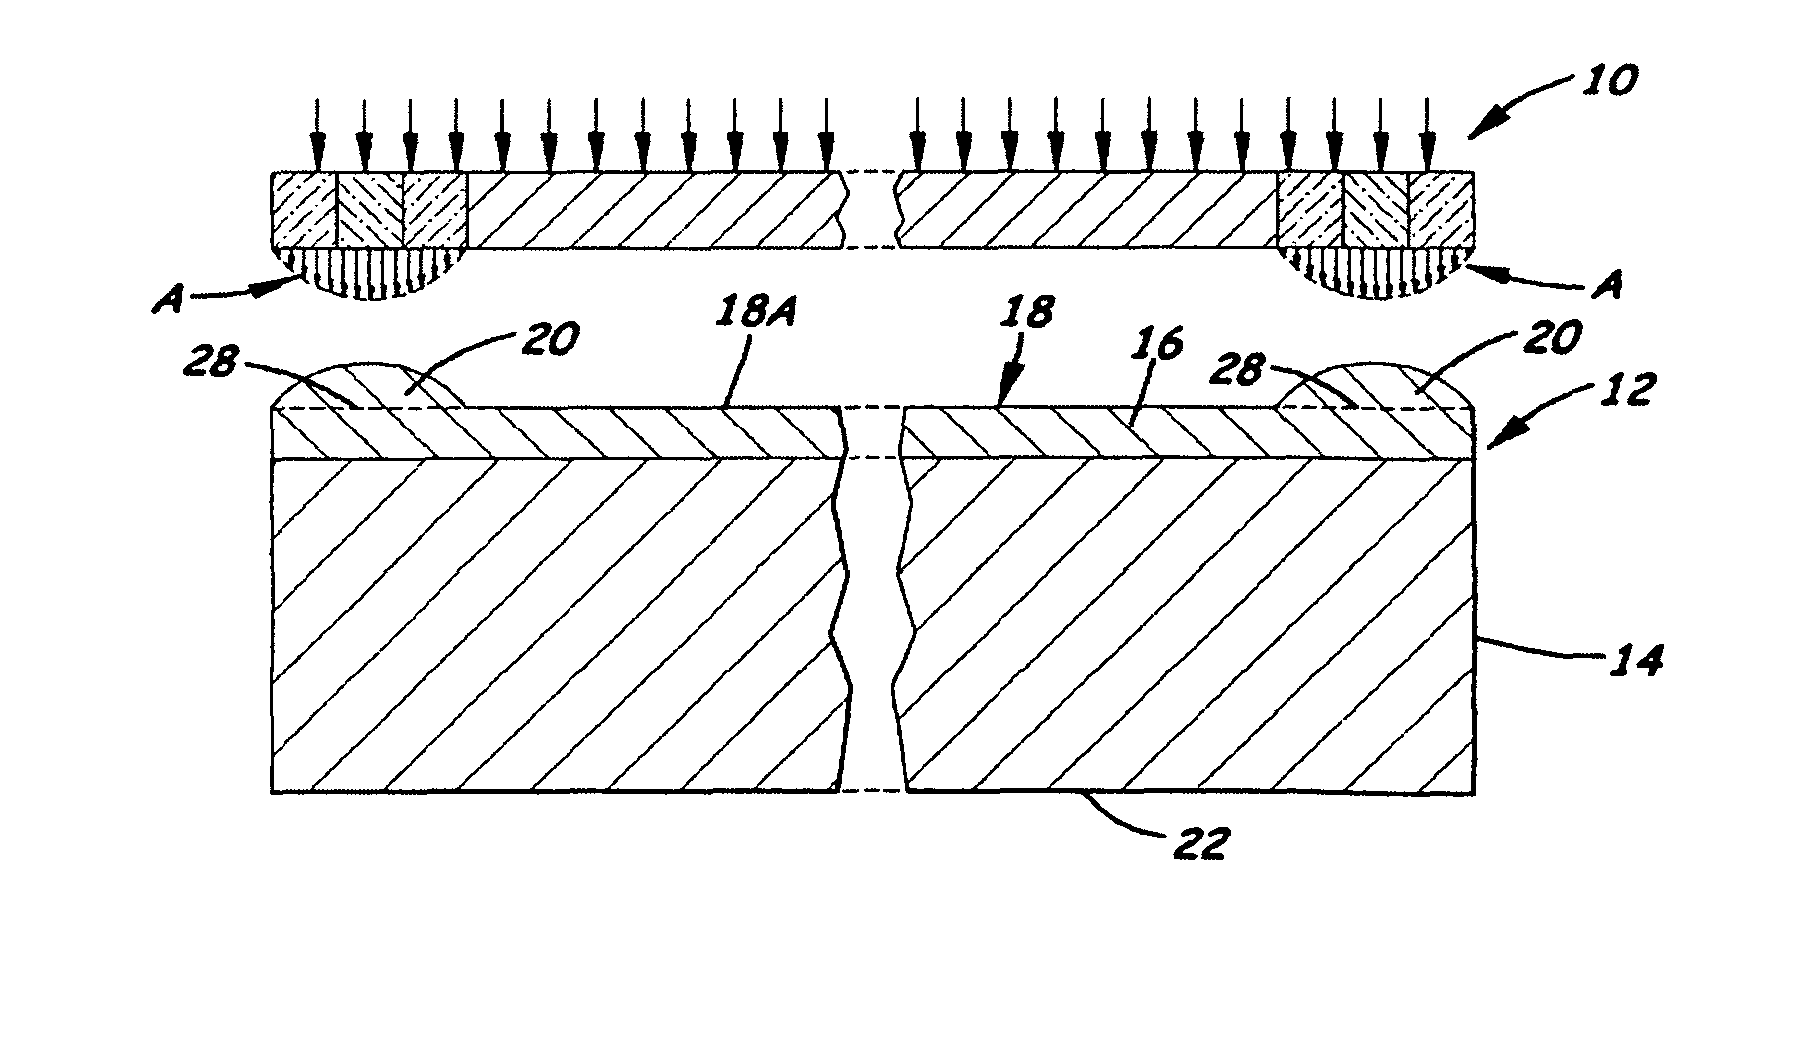 Methods for planarizing unevenness on surface of wafer photoresist layer and wafers produced by the methods